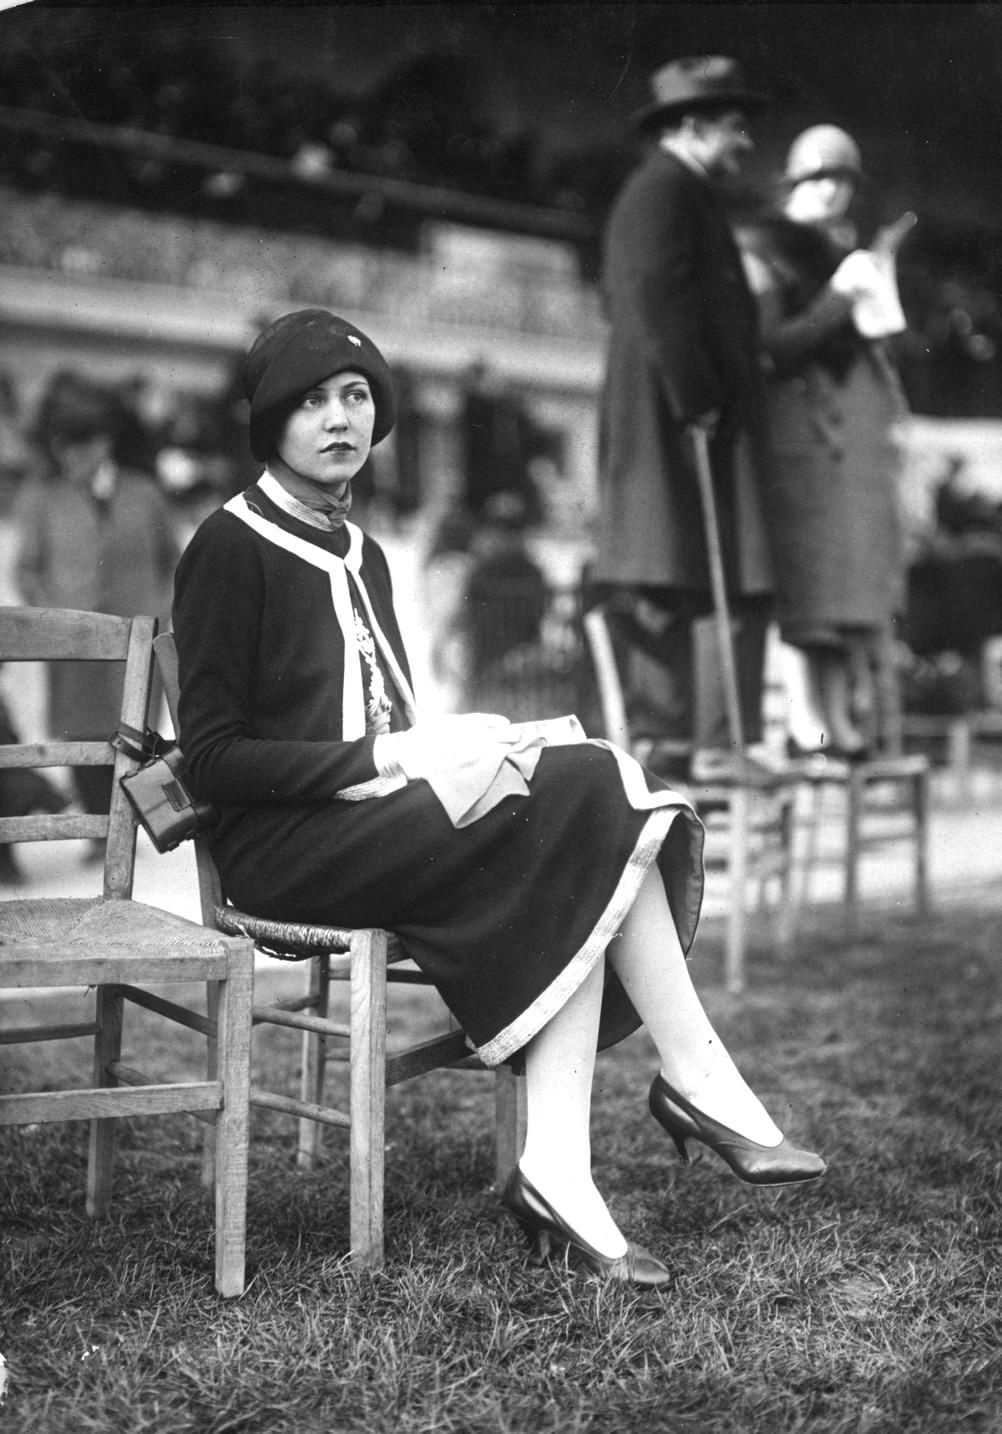 Jumper suit with contrasting trim worn with a cloche hat with turned back brim, 1925